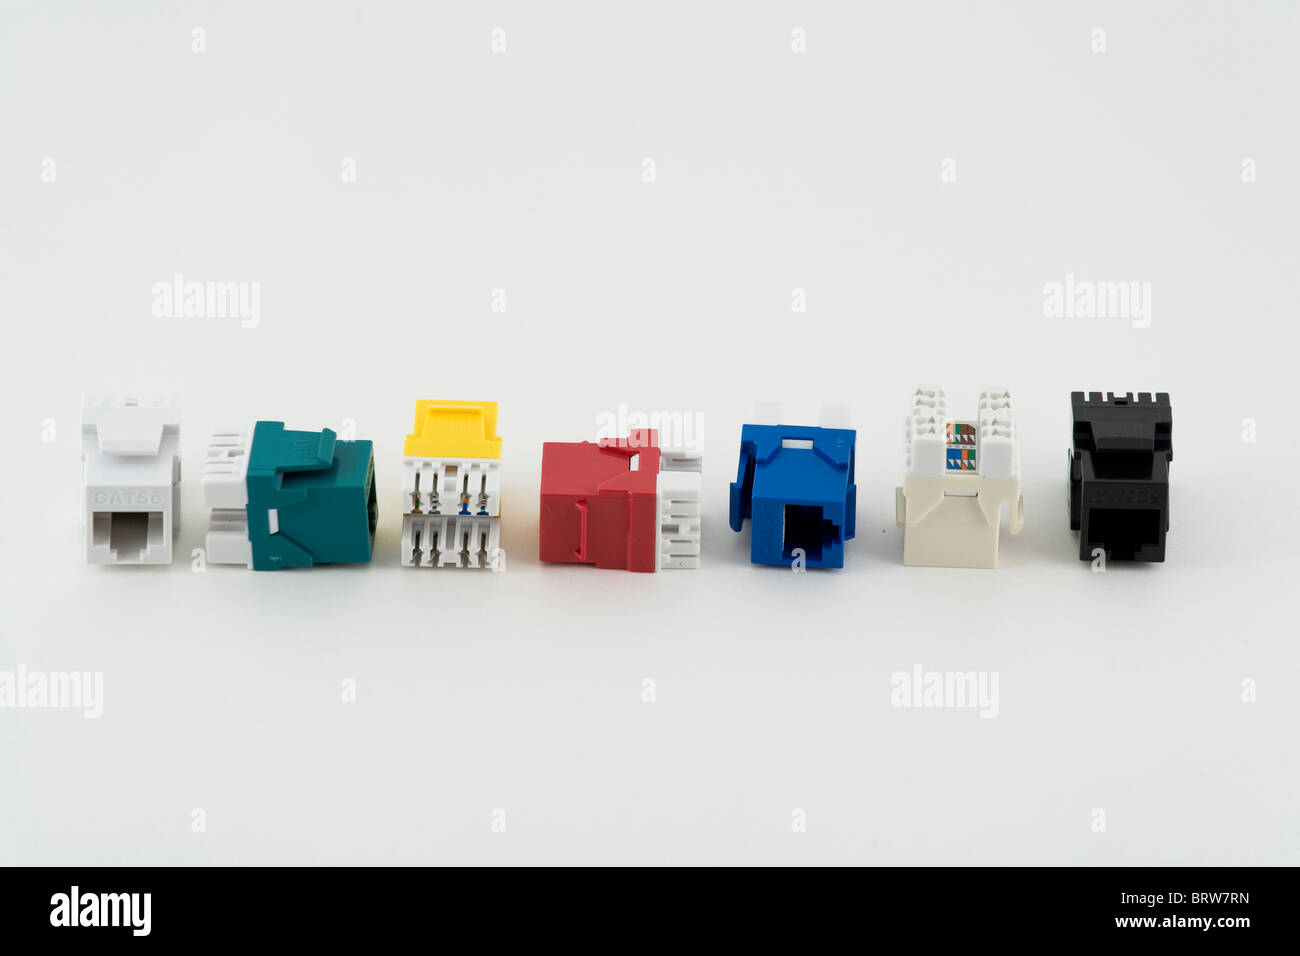 Modules, connectors, cables, plug in, color, macro, close up, advertising, catalogue Stock Photo